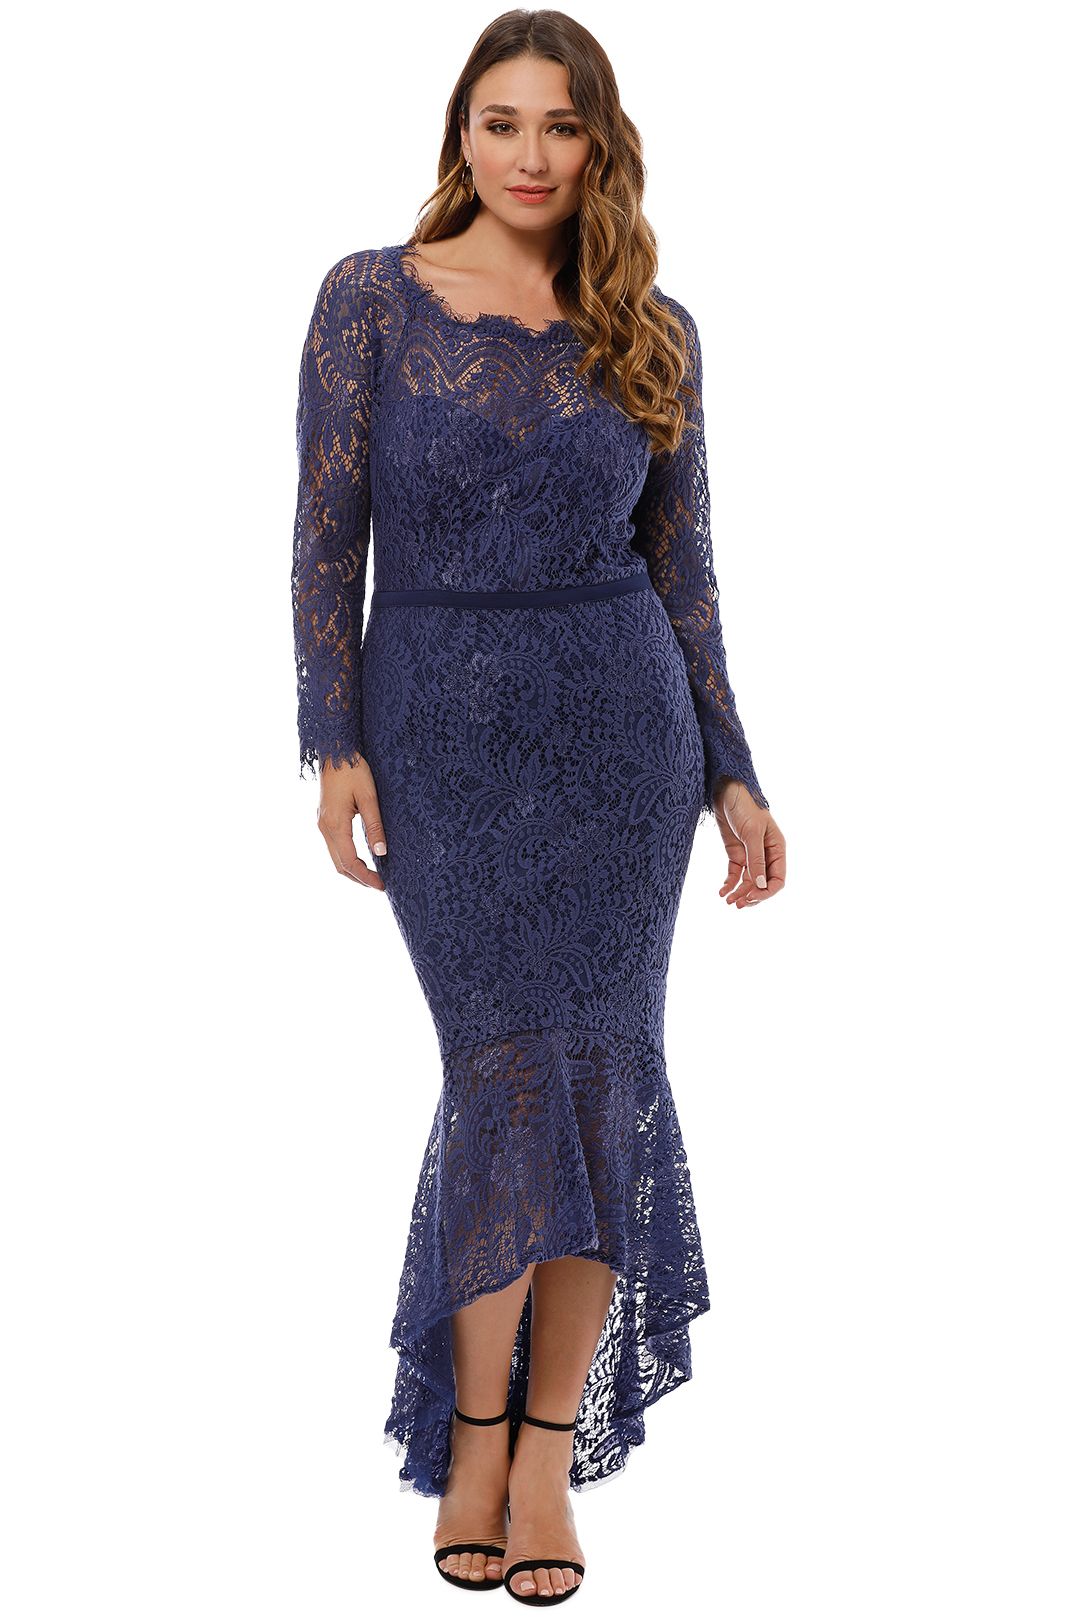 Lamour - Ana Gown - Royal Blue - Front